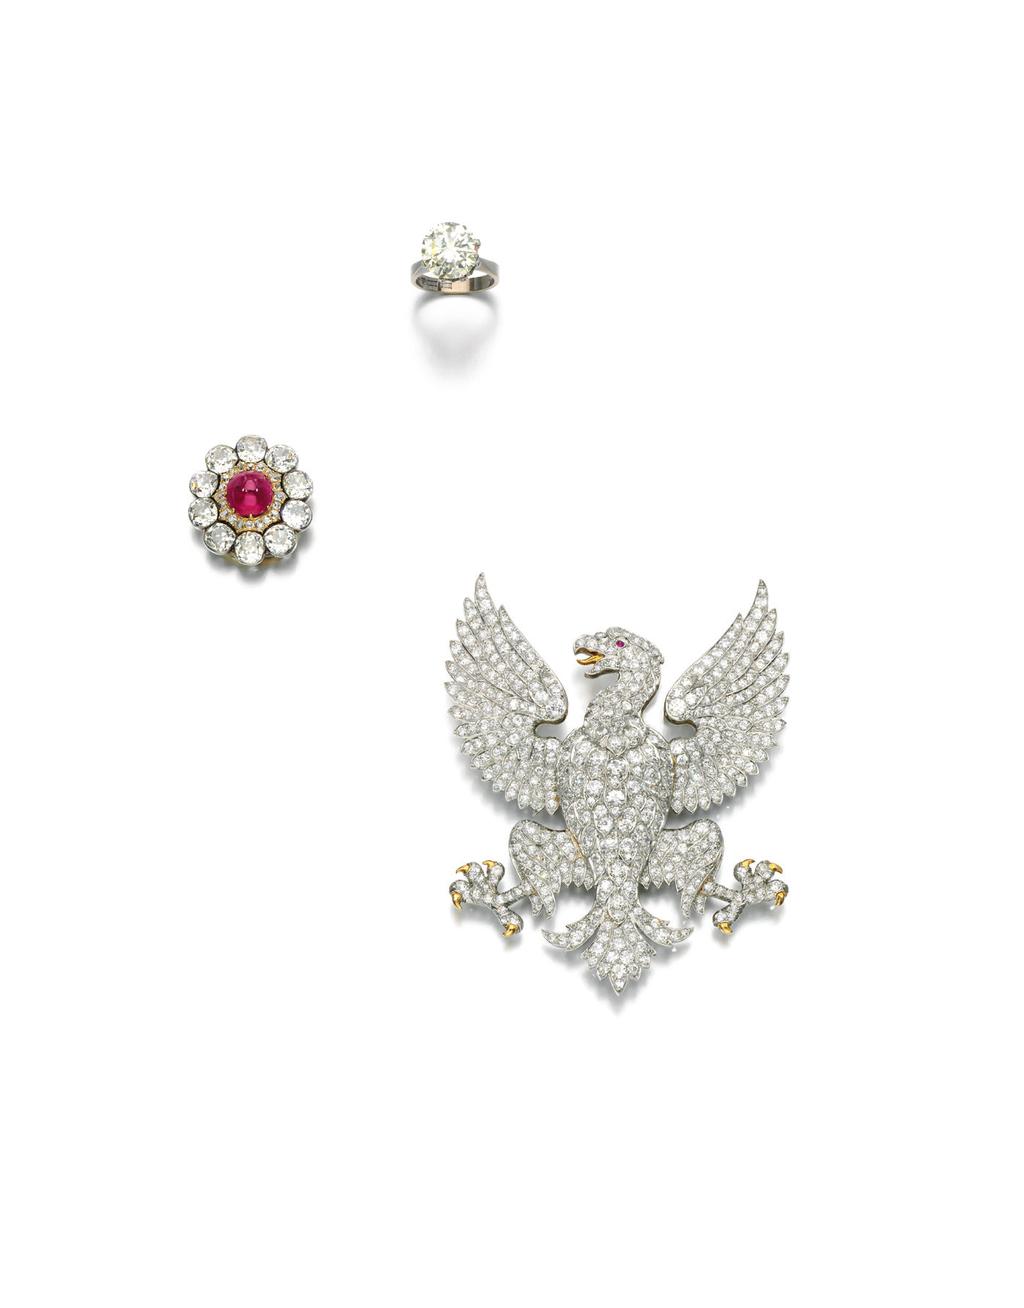 diamonds and cabochon ruby eyes (Lot 210, right, est. 20,000 30,000/ 28,100 42,100/ US$ 29,000 44,900).